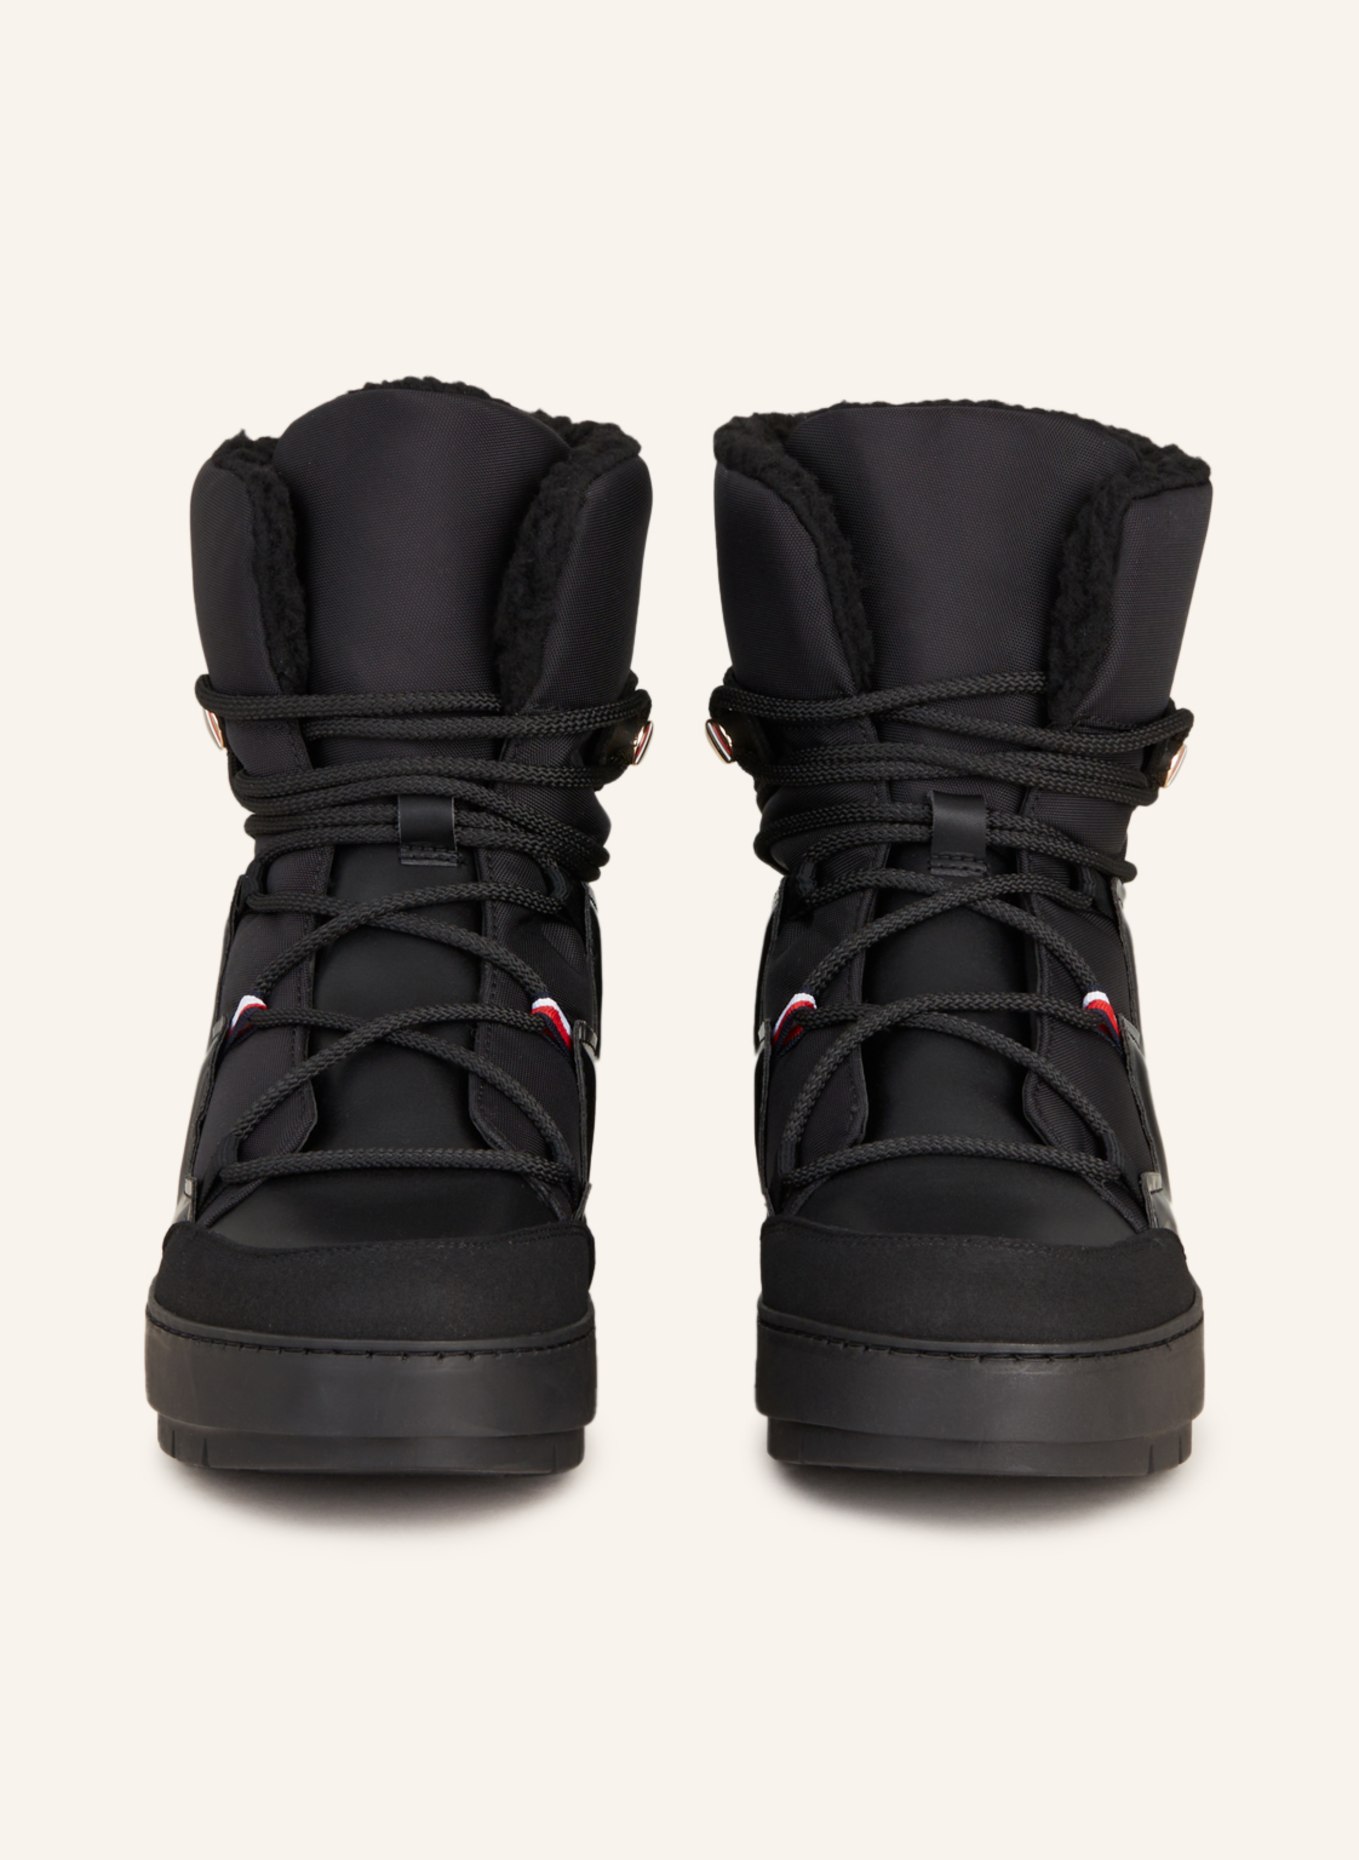 TOMMY black HILFIGER Lace-up in boots